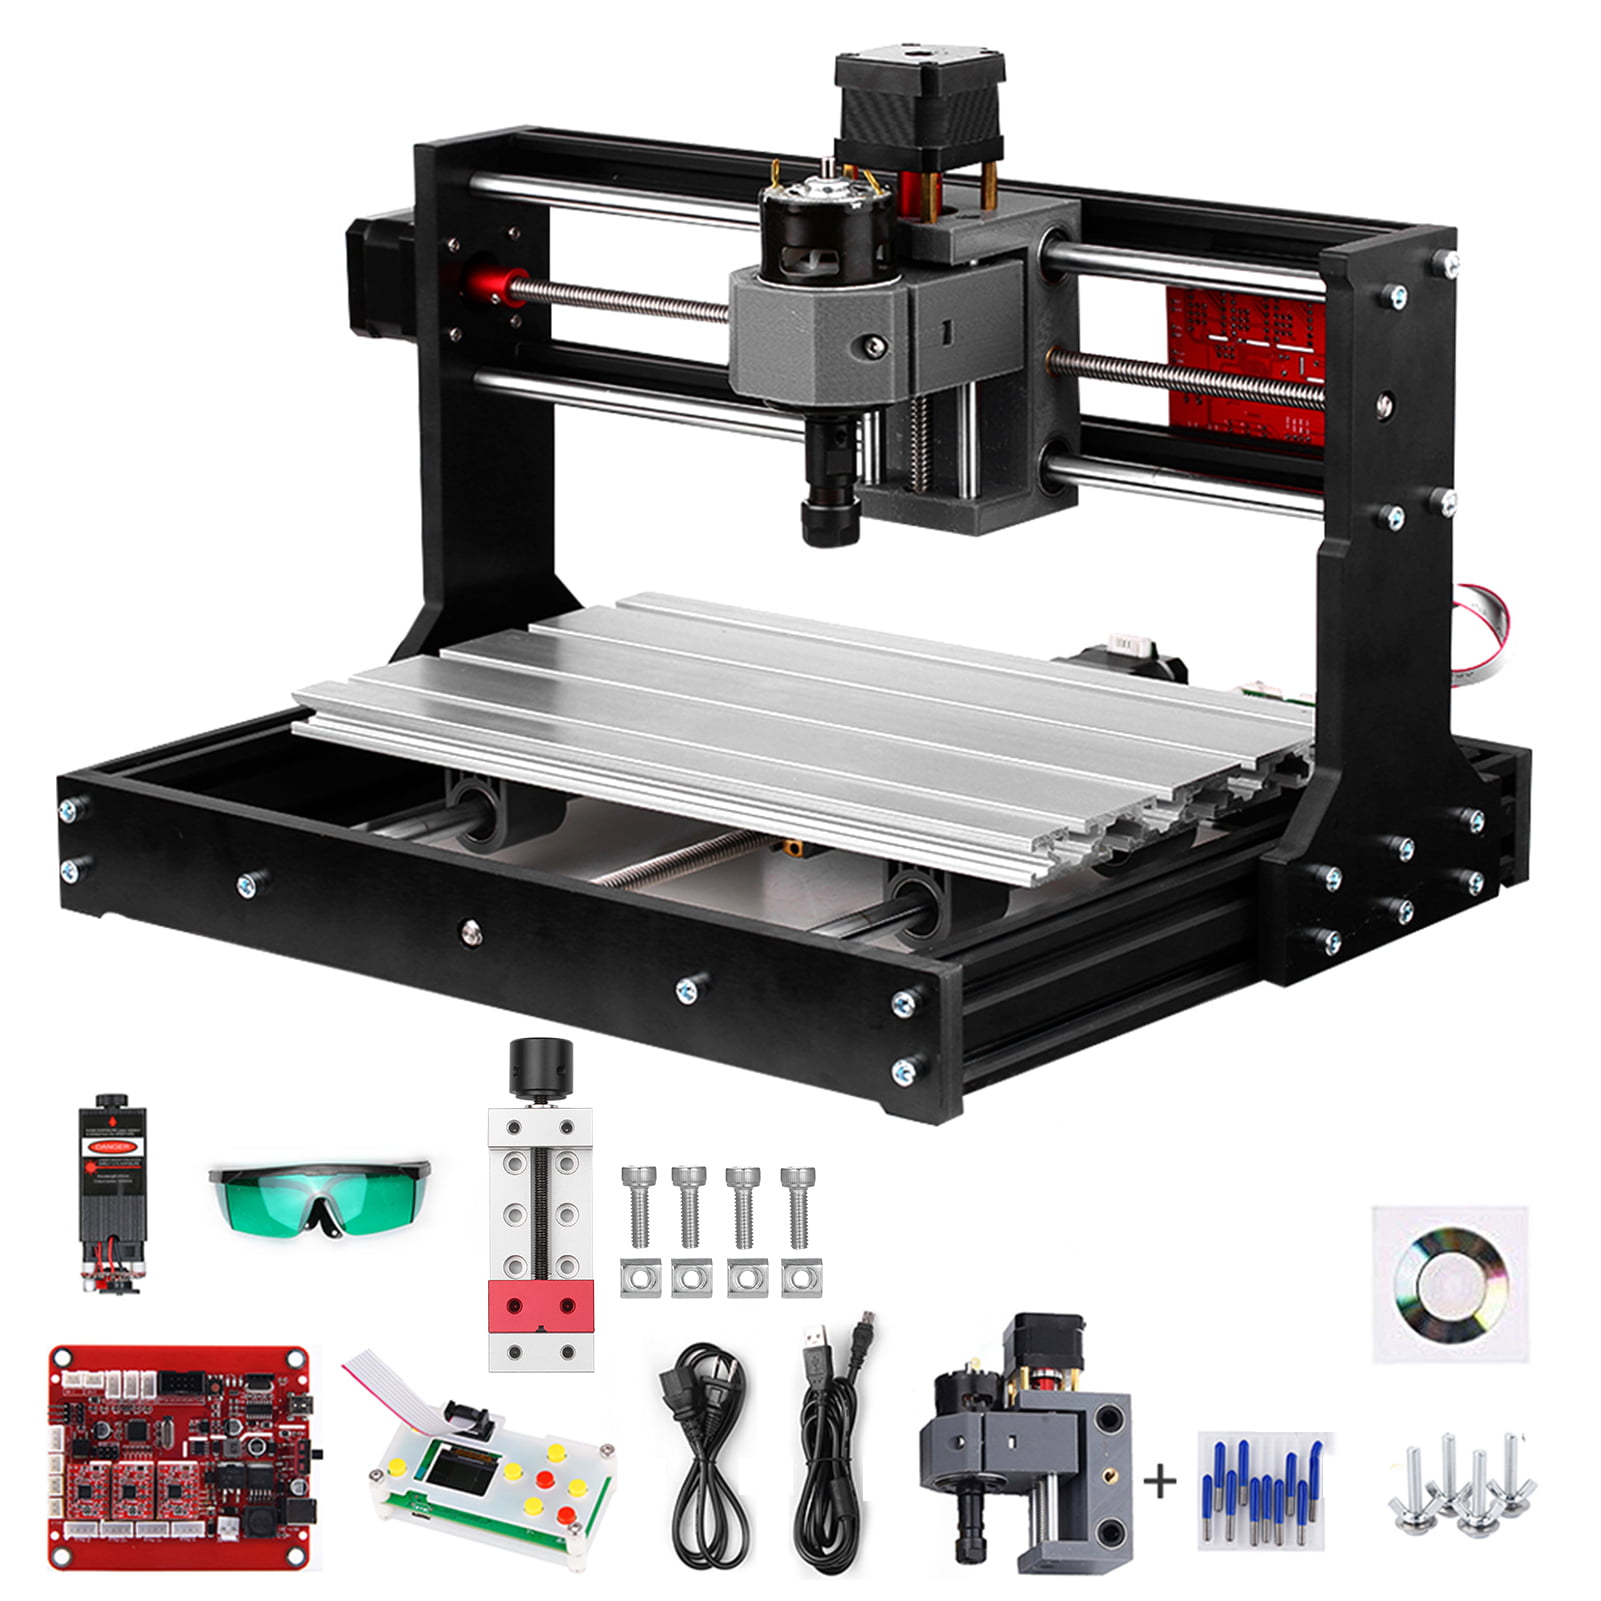 3 Axis CNC 3018 Router Wood Acrylic Milling Engraving Machine DIY Engraver US 